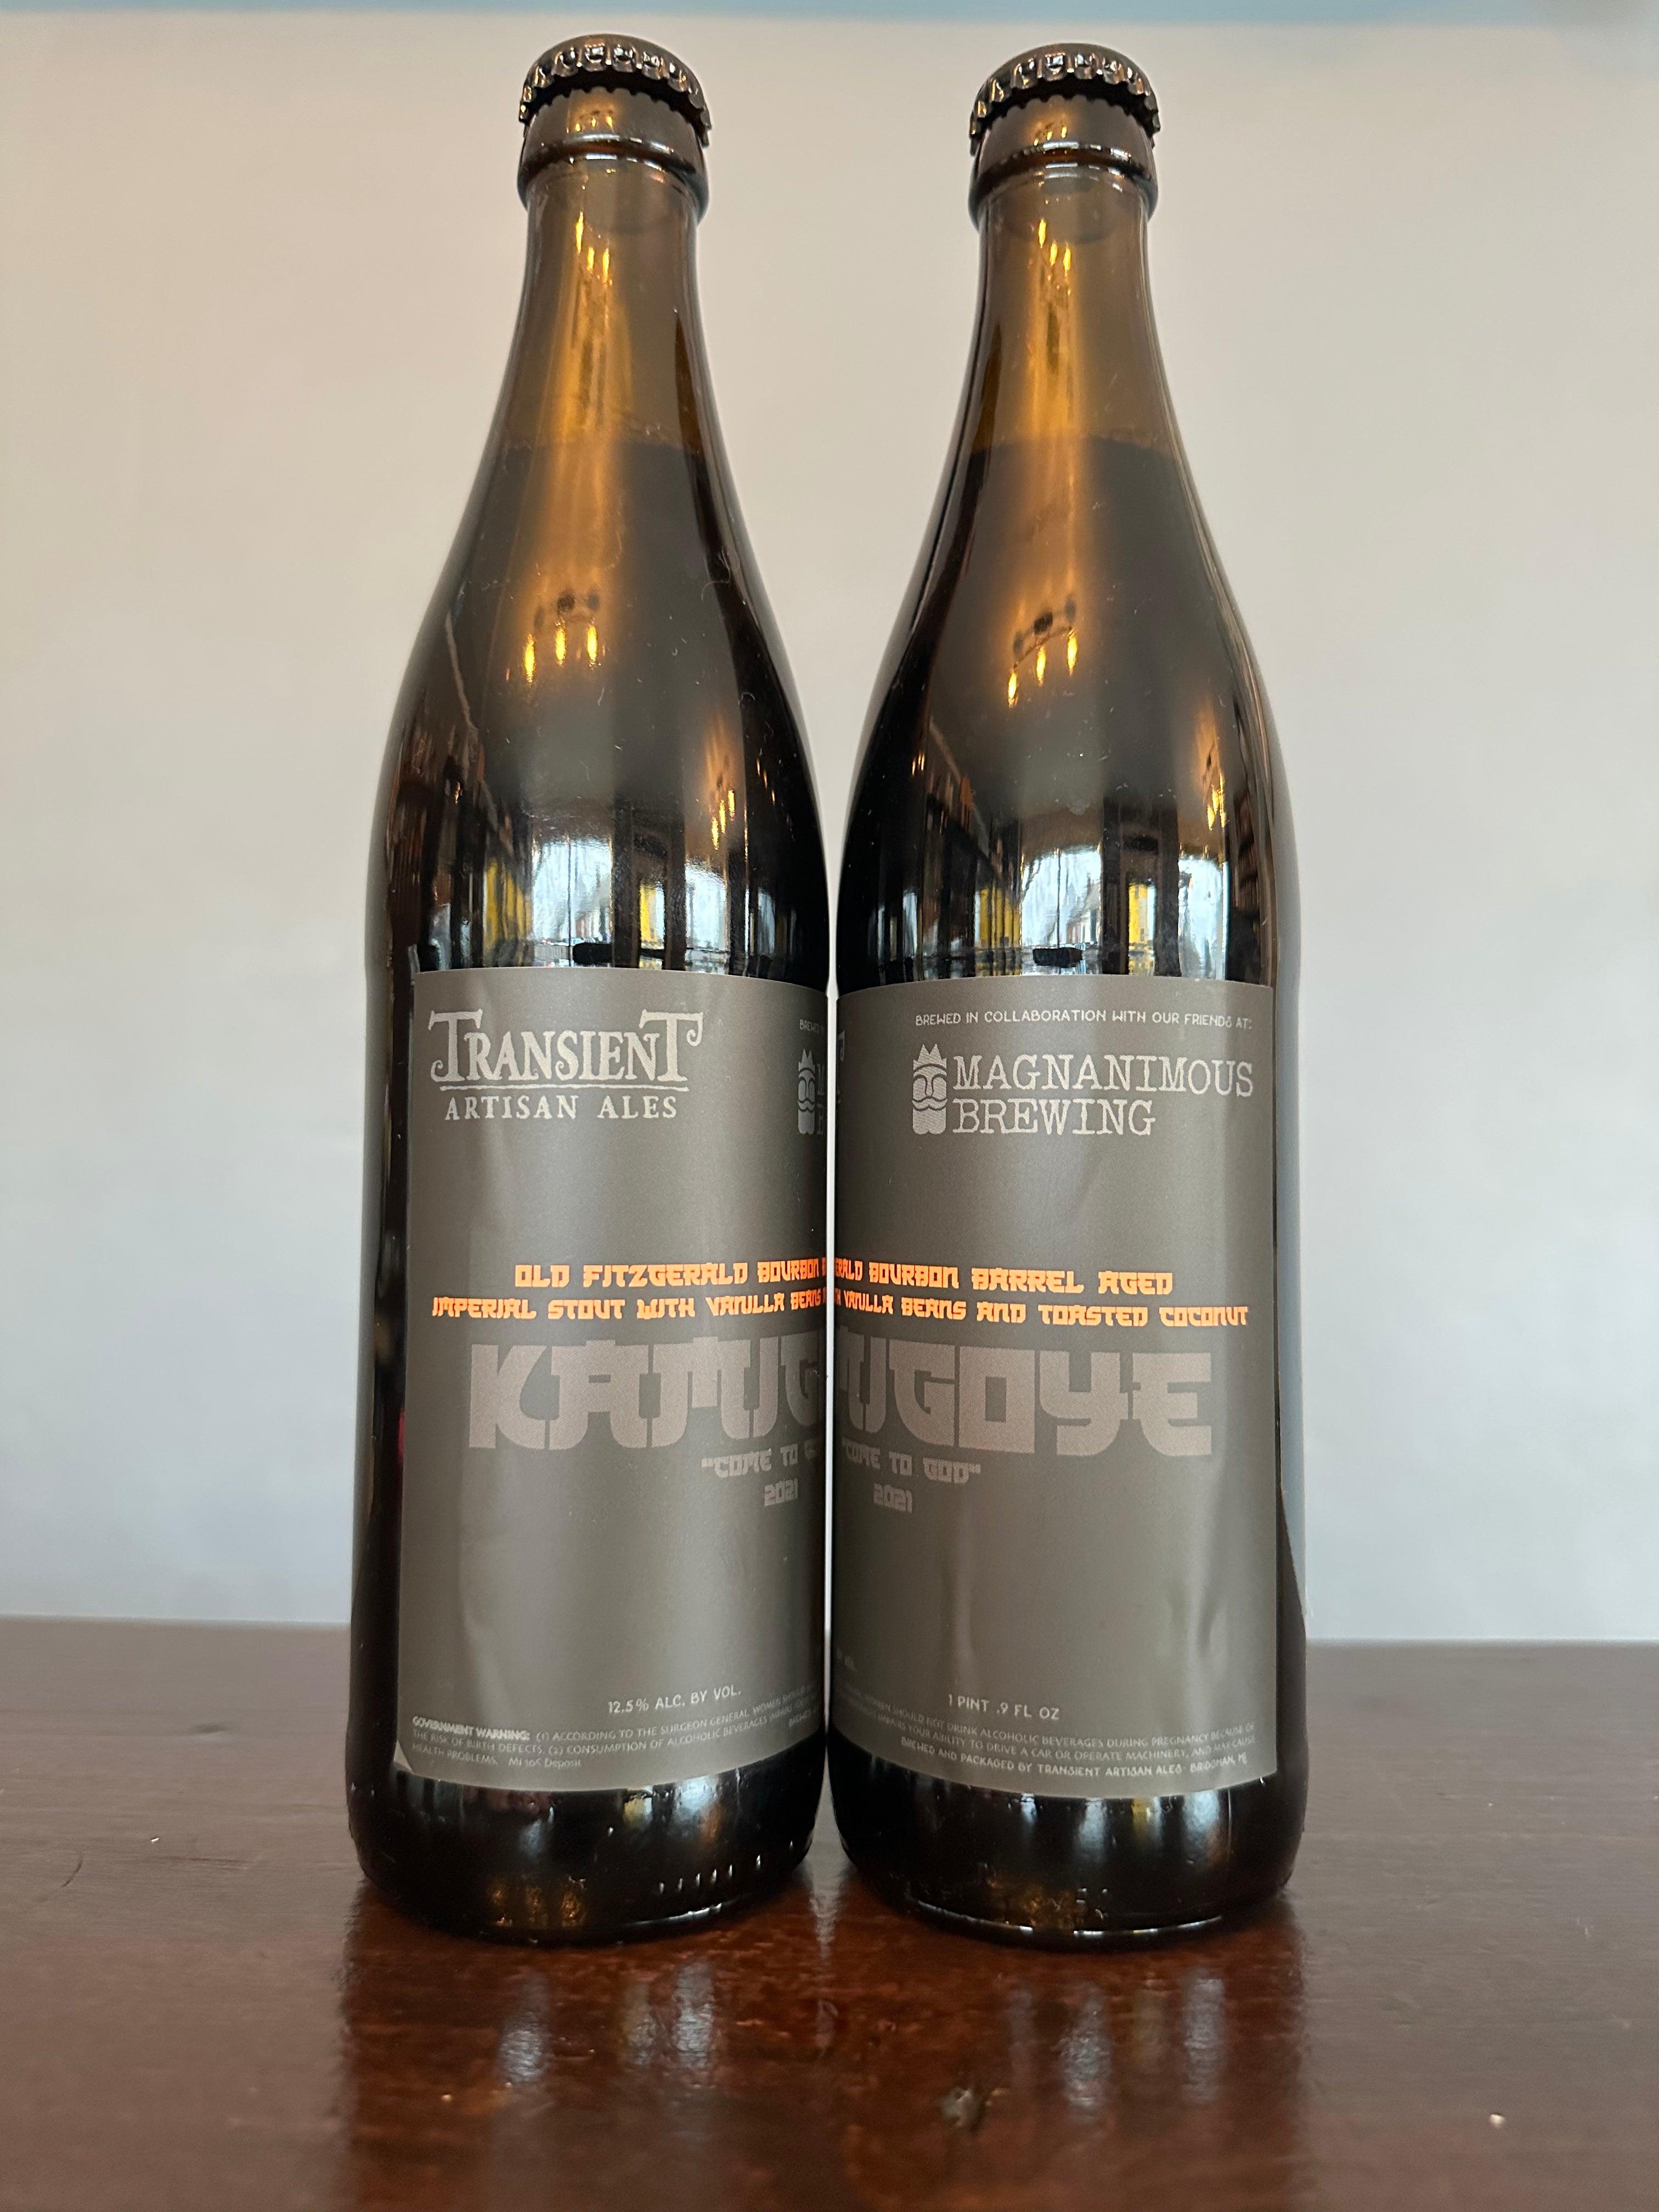 Transient x Magnanimous Brewing Kamugoye bourbon Barrel Aged Imperial Stout with Vanilla Beans and Toasted Coconut 12.5%